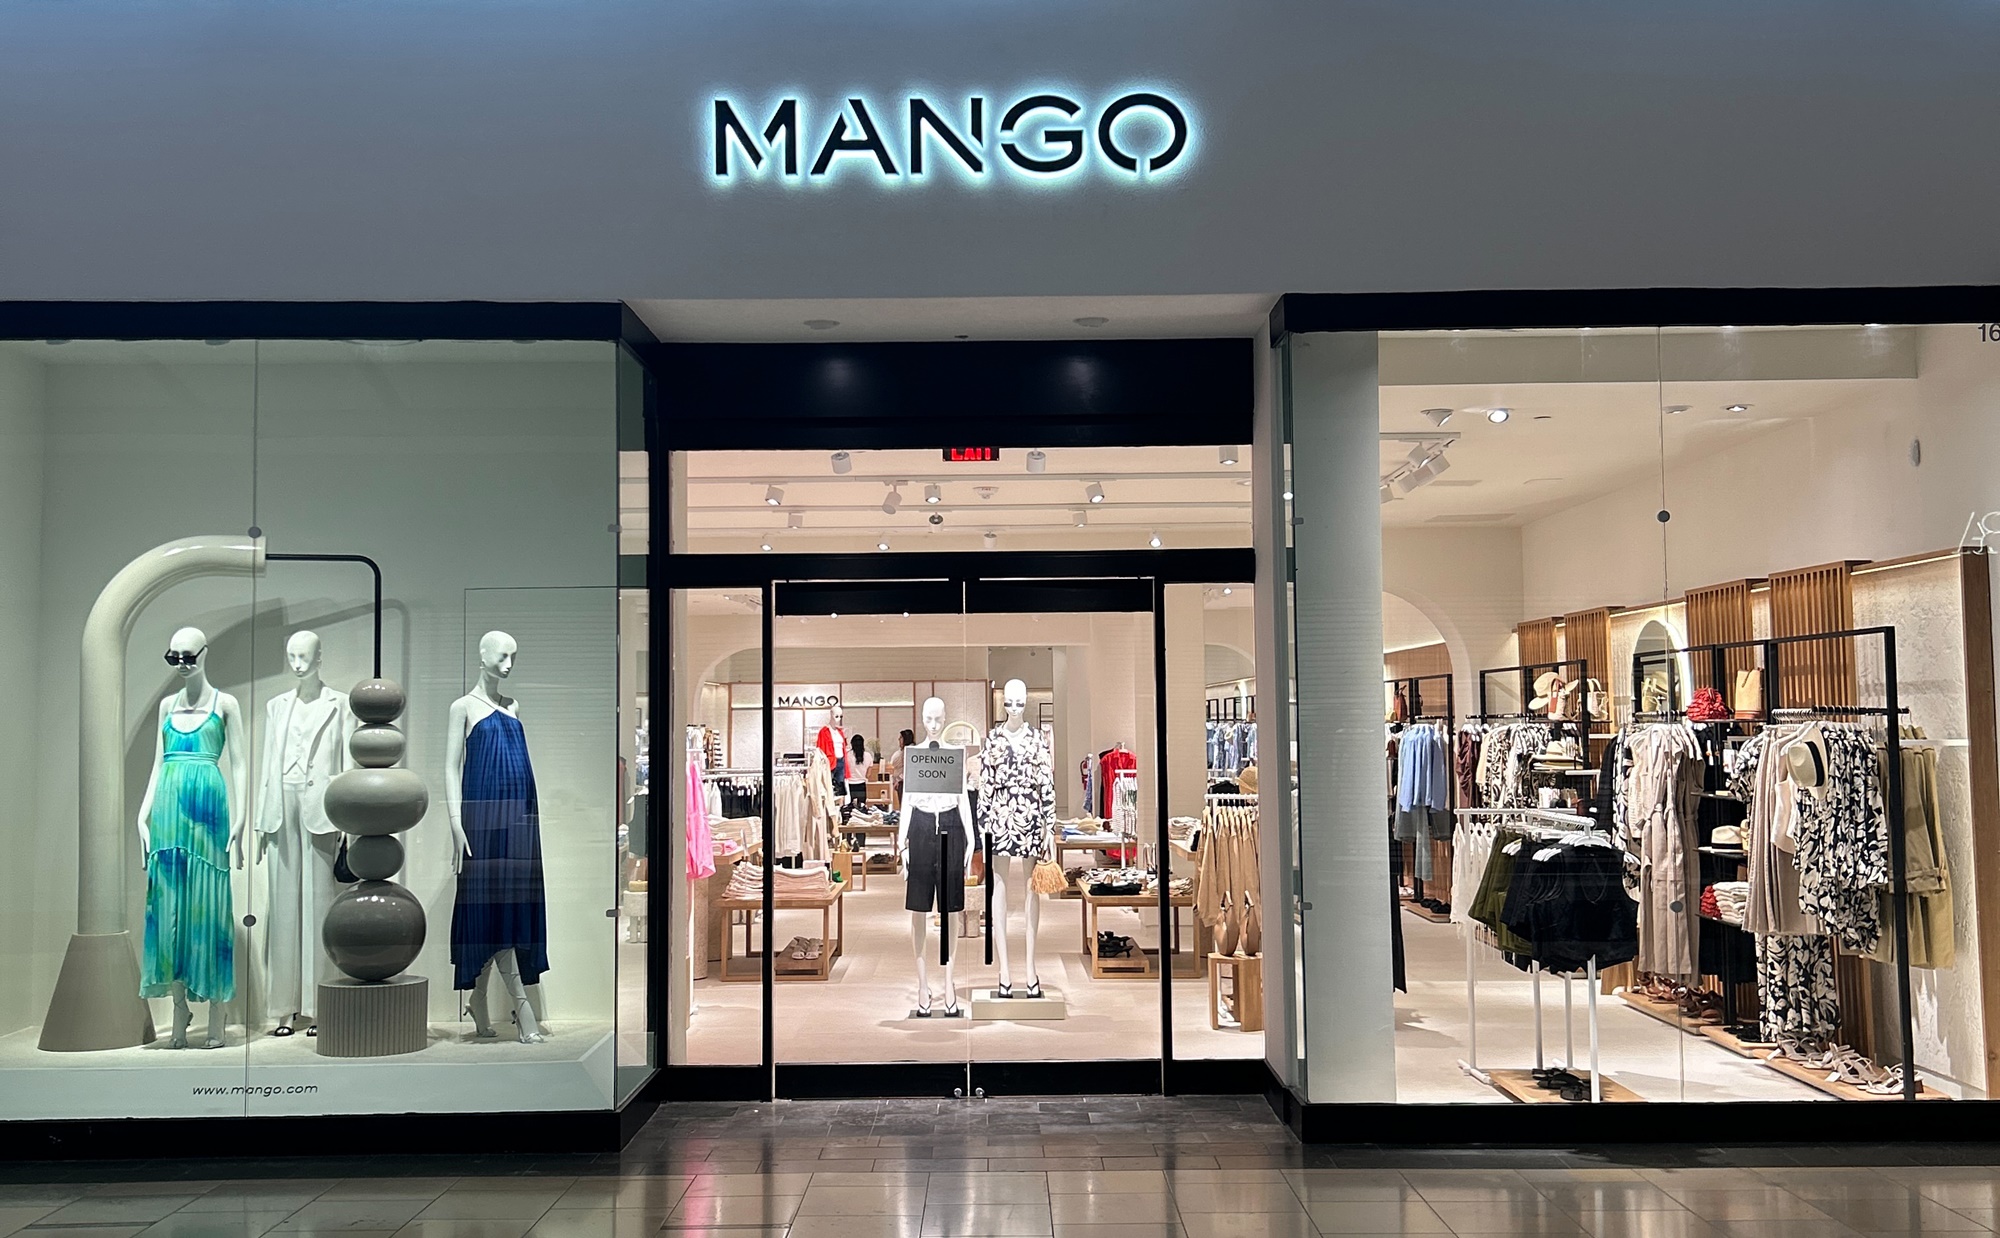 Mango storefront at The Shops at la Cantera (San Antonio, TX). Store finish-out completed by Westwood Contractors, Inc.